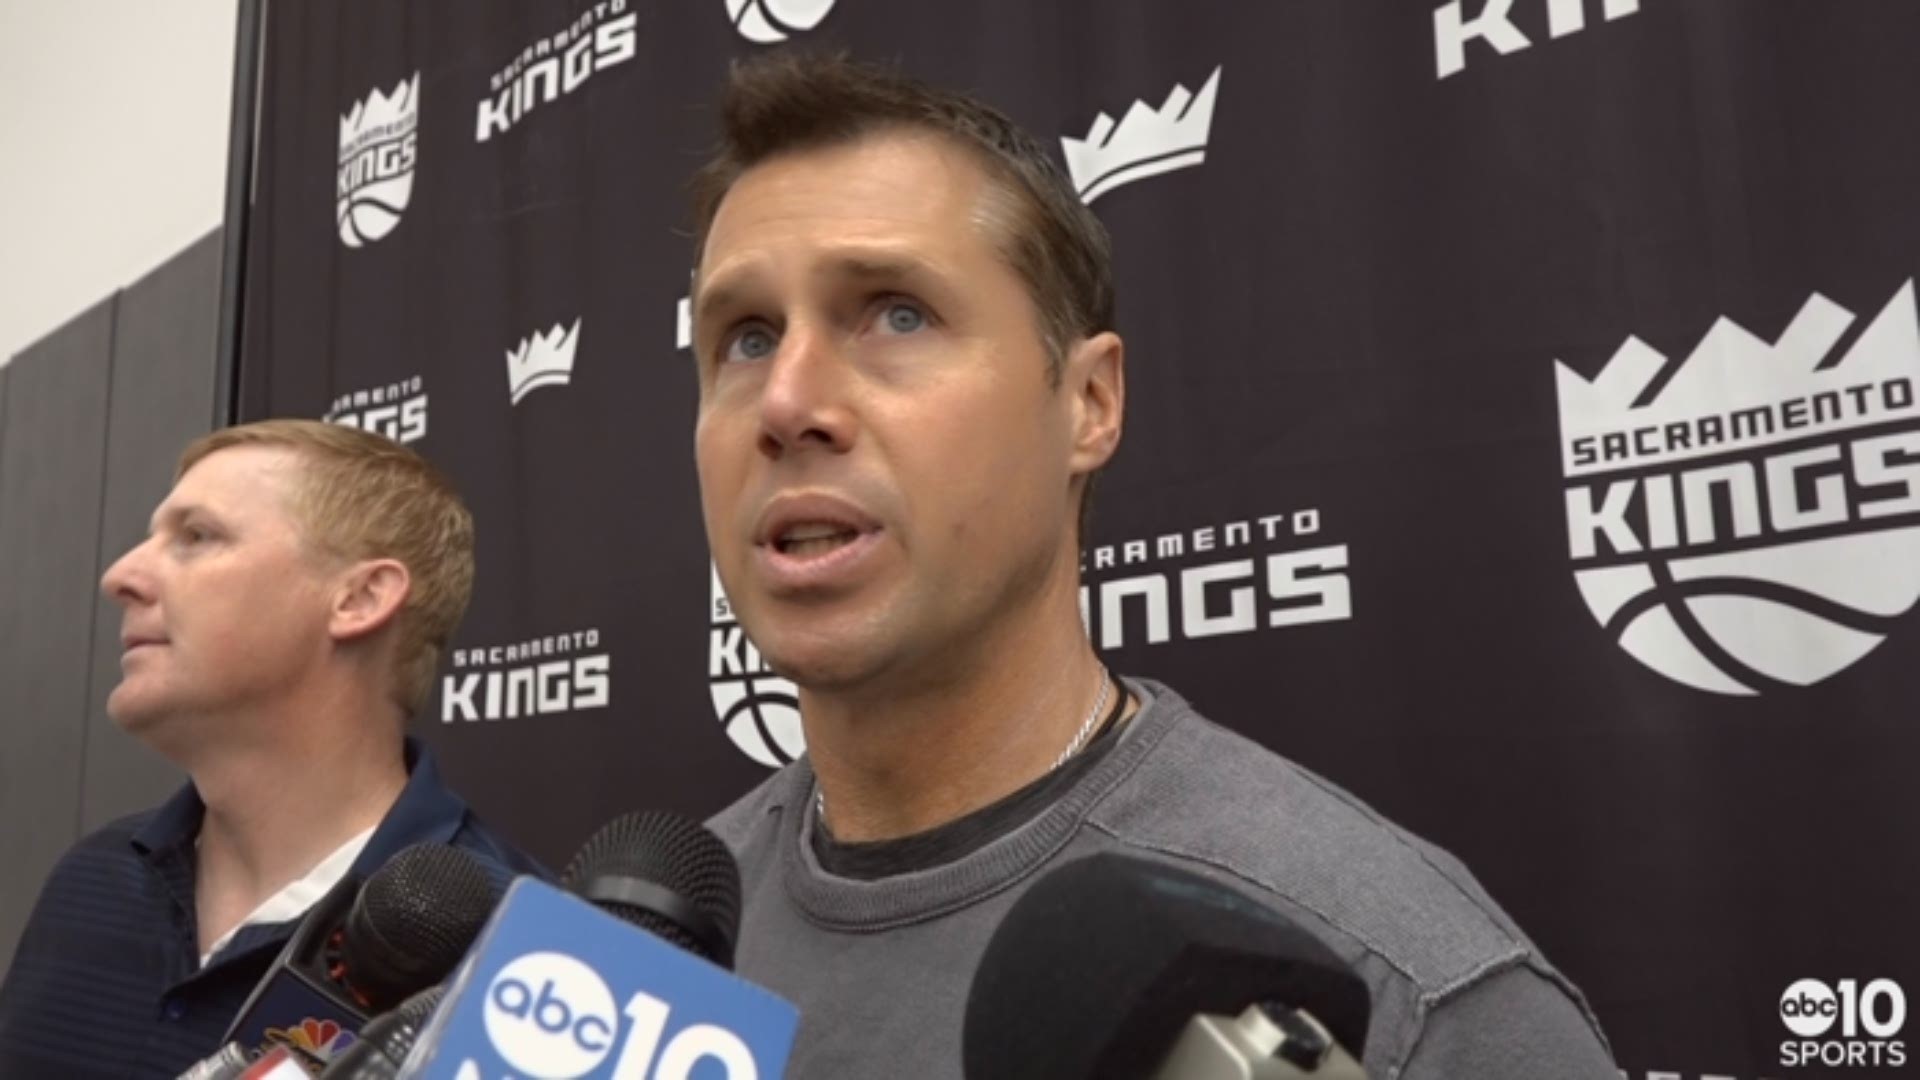 At Wednesday's practice, Kings head coach Dave Joerger discusses the benefit of having a few days off before resuming play on Friday in Memphis, the first of a two-game trip, the improved defensive play and the praise he and the team received from San Antonio Spurs head coach Gregg Popovich.